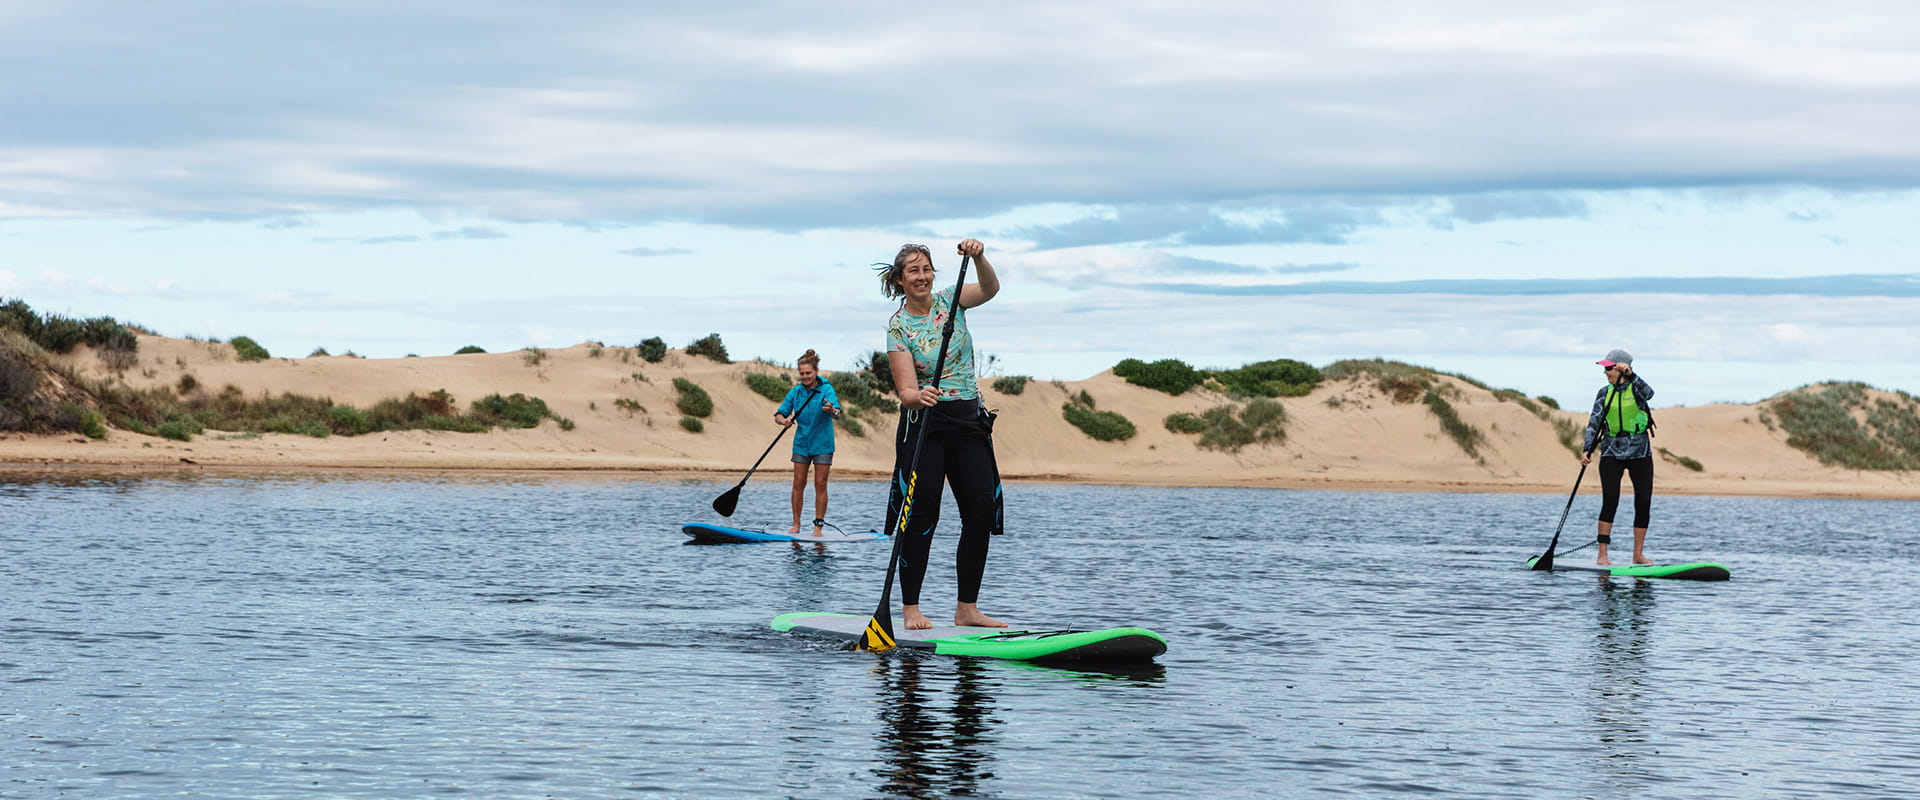 Three women stand-up-paddle board on small estuary in front of sand dunes.